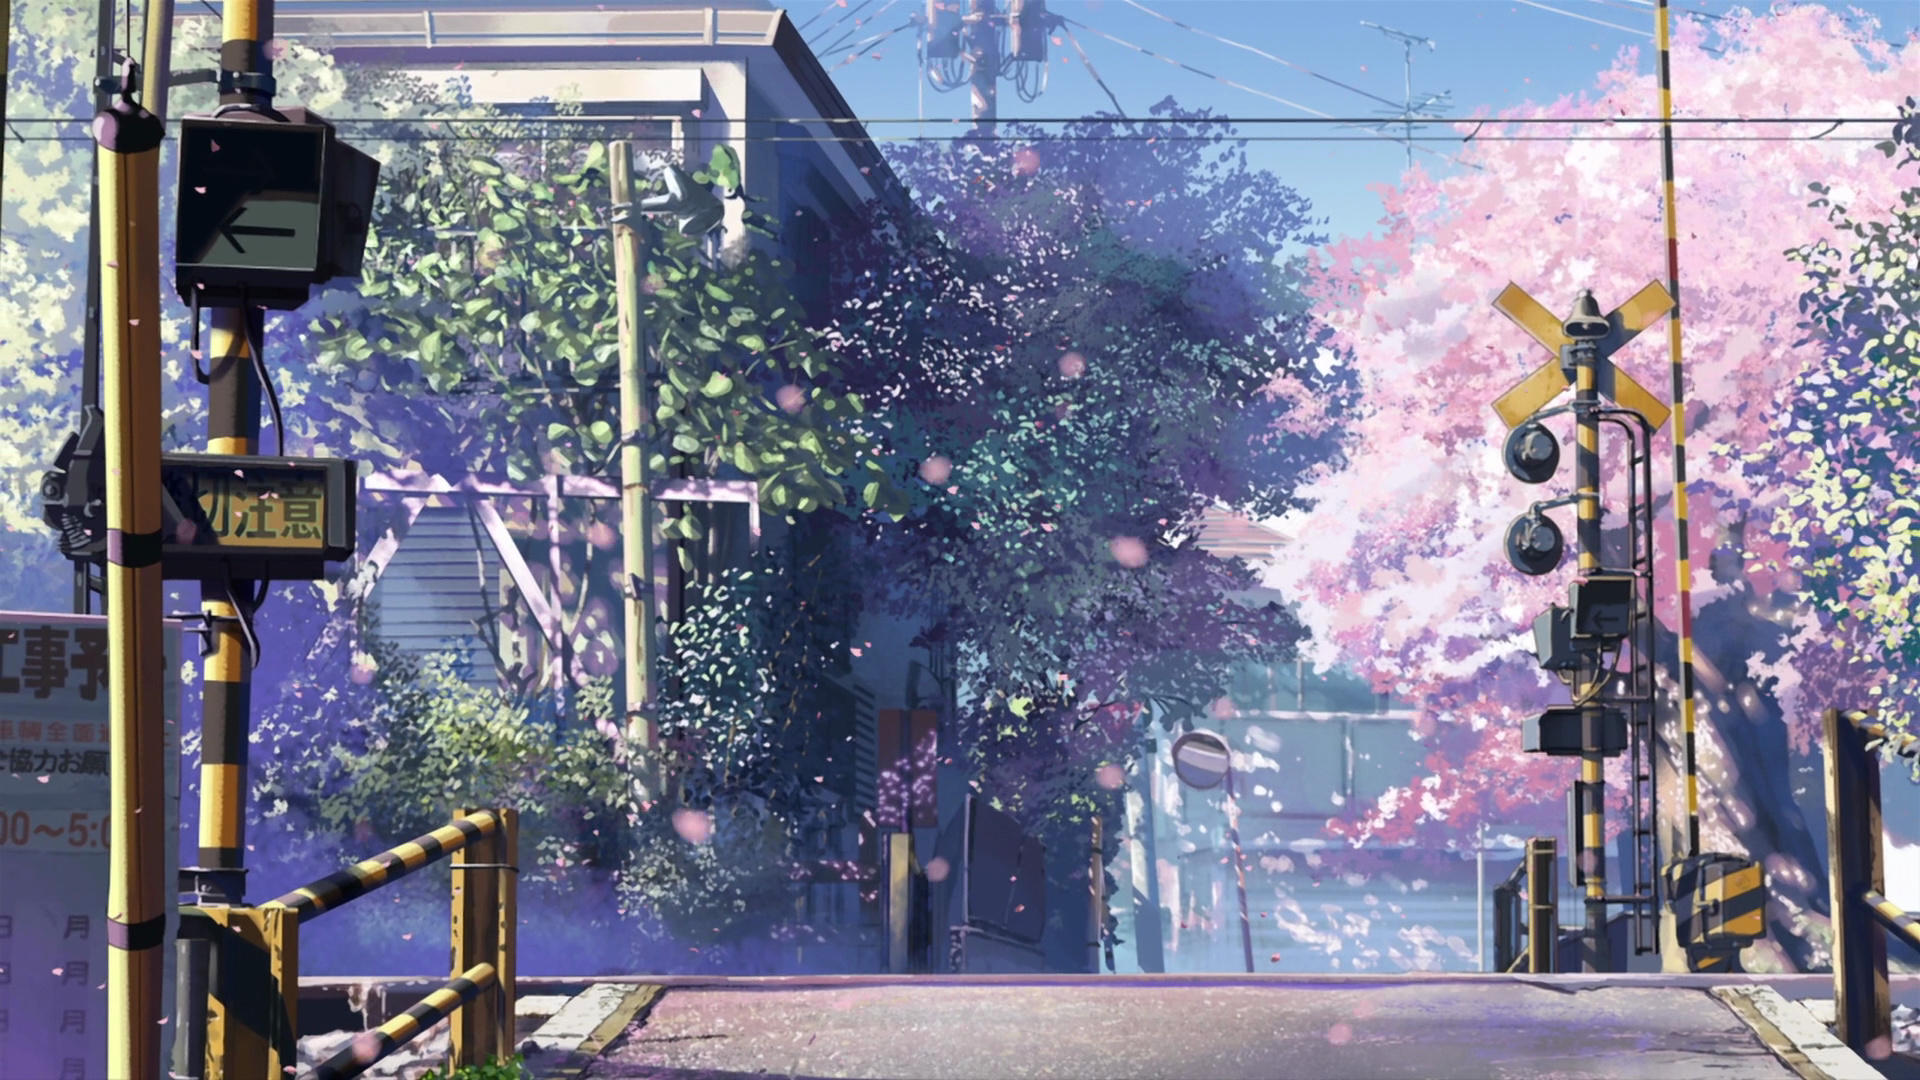 5 Centimeters Per Second Anime Tv Series HD Anime 4k Wallpapers Images  Backgrounds Photos and Pictures